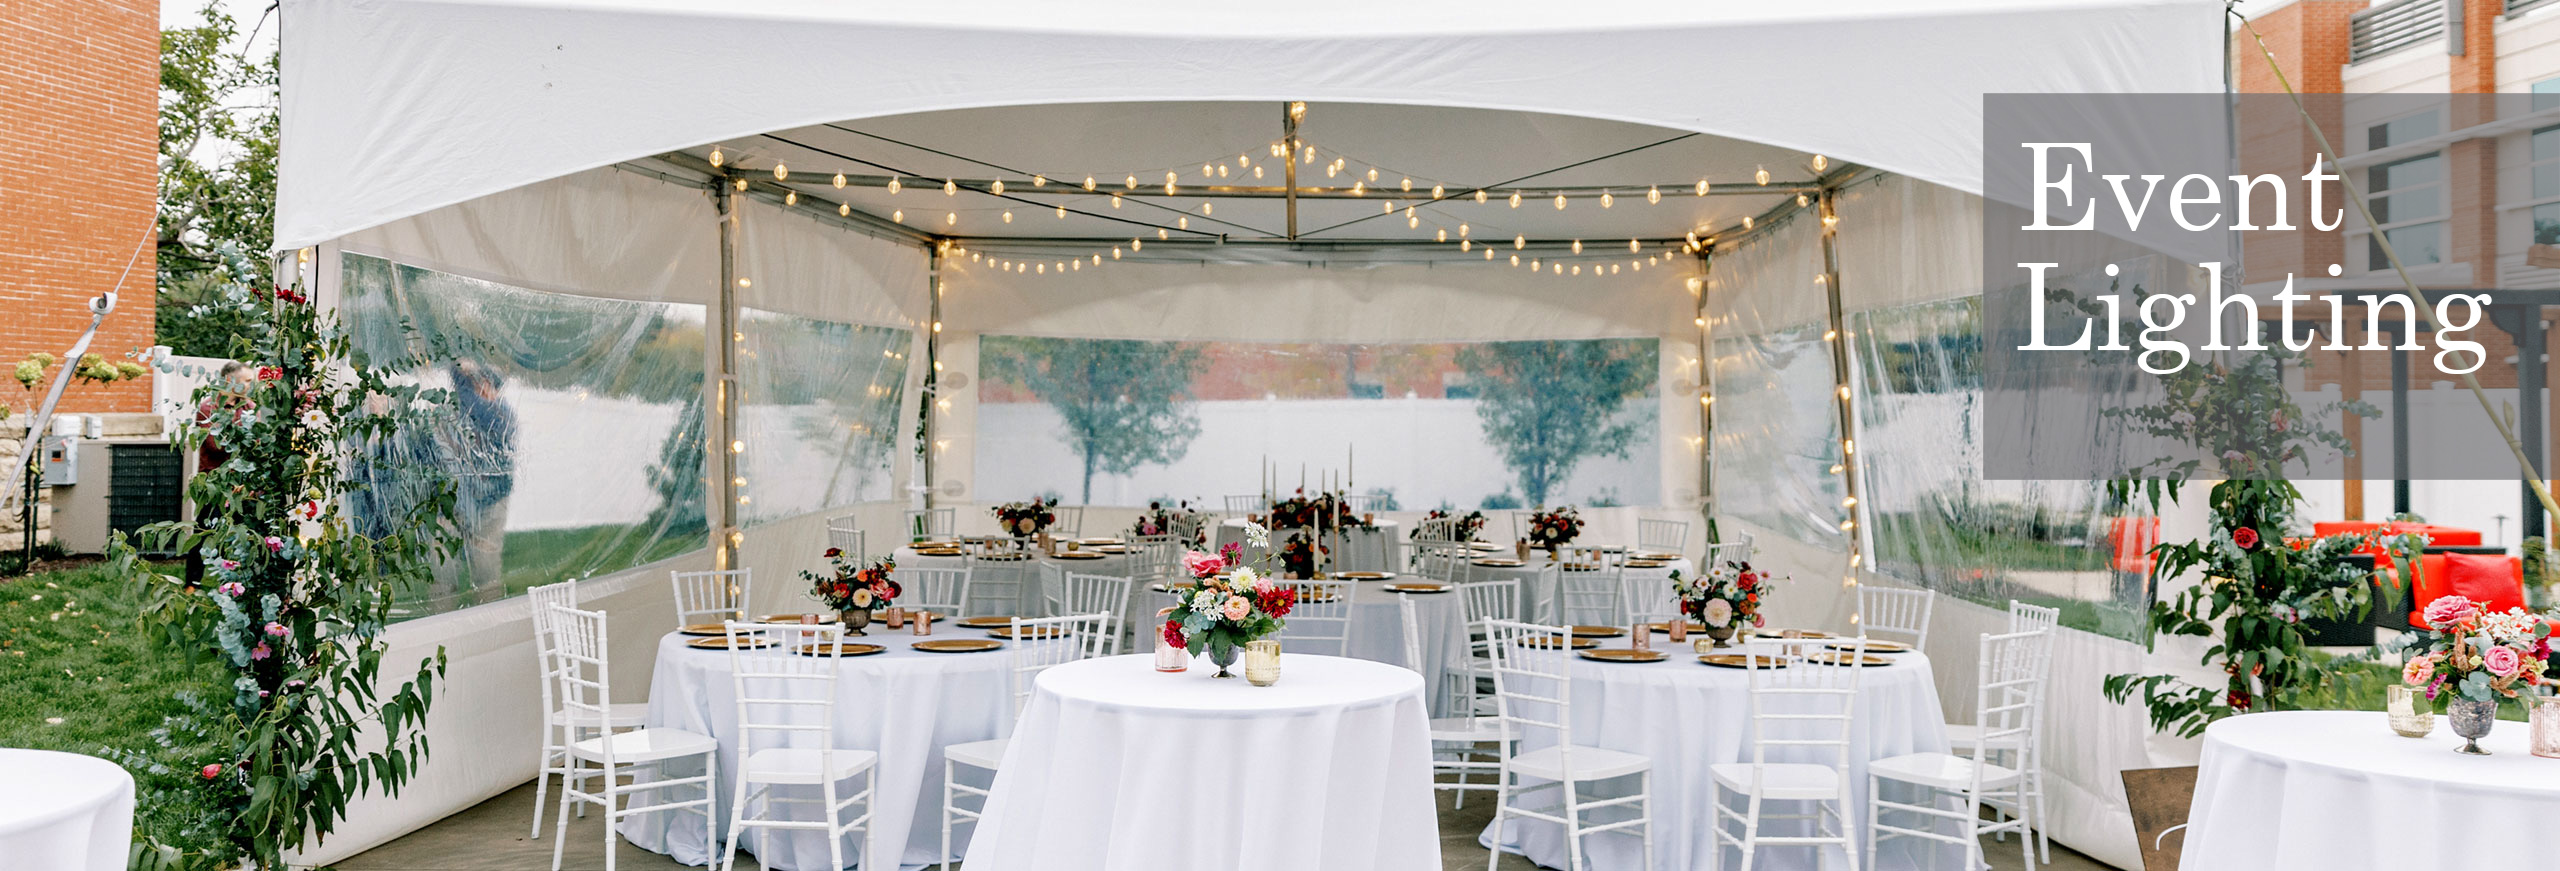 tent white linens outdoor